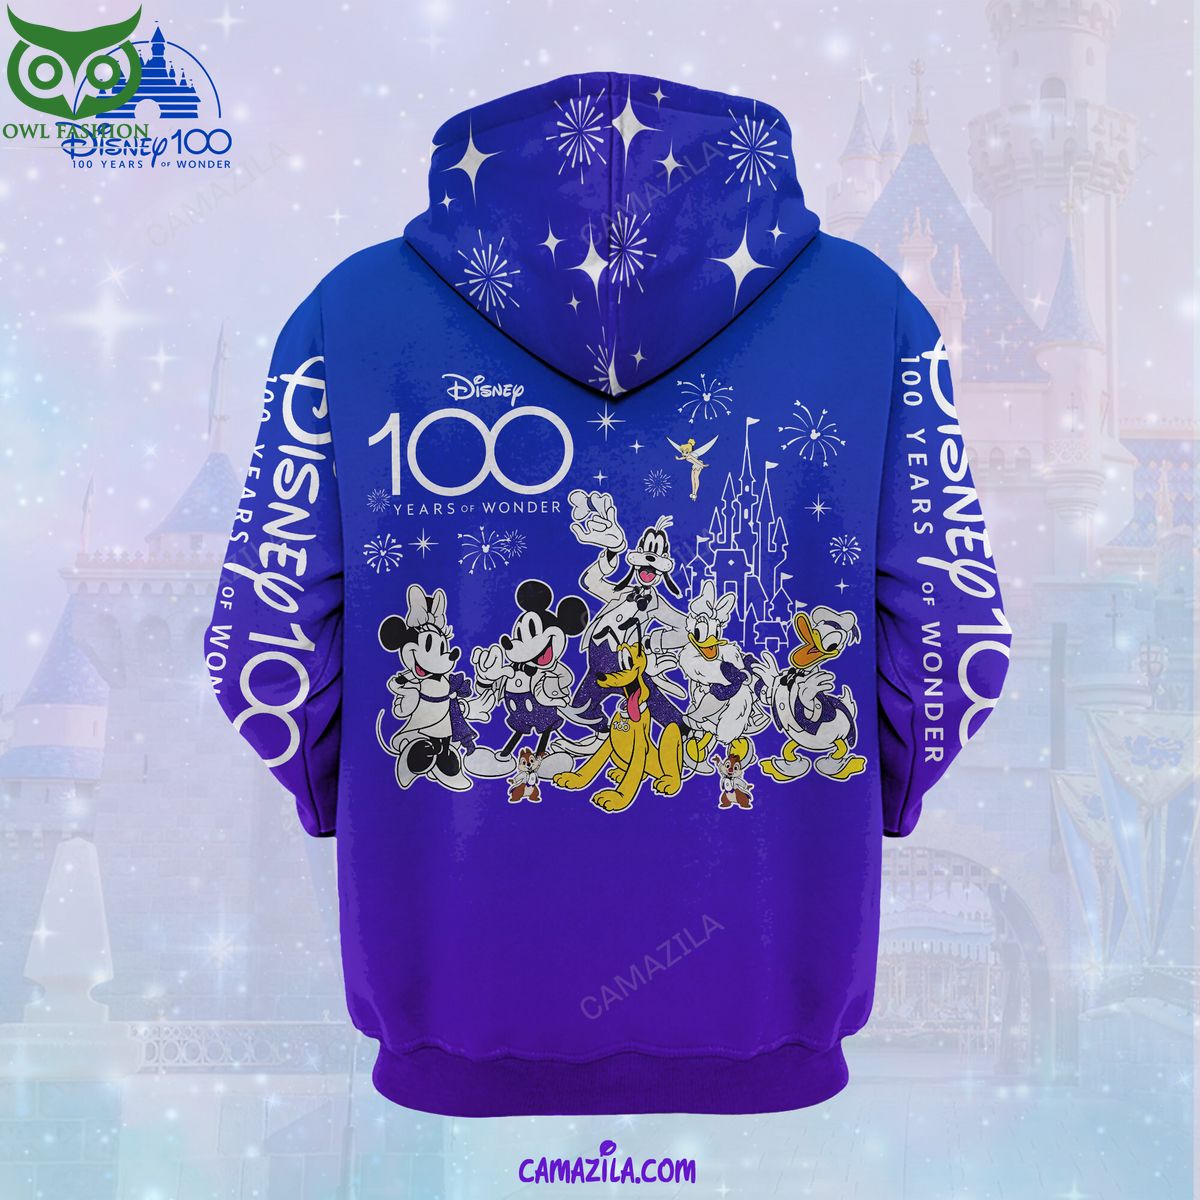 Disney Goofy 100 Years of Wonder 3D Hoodie Zip Wow! What a picture you click